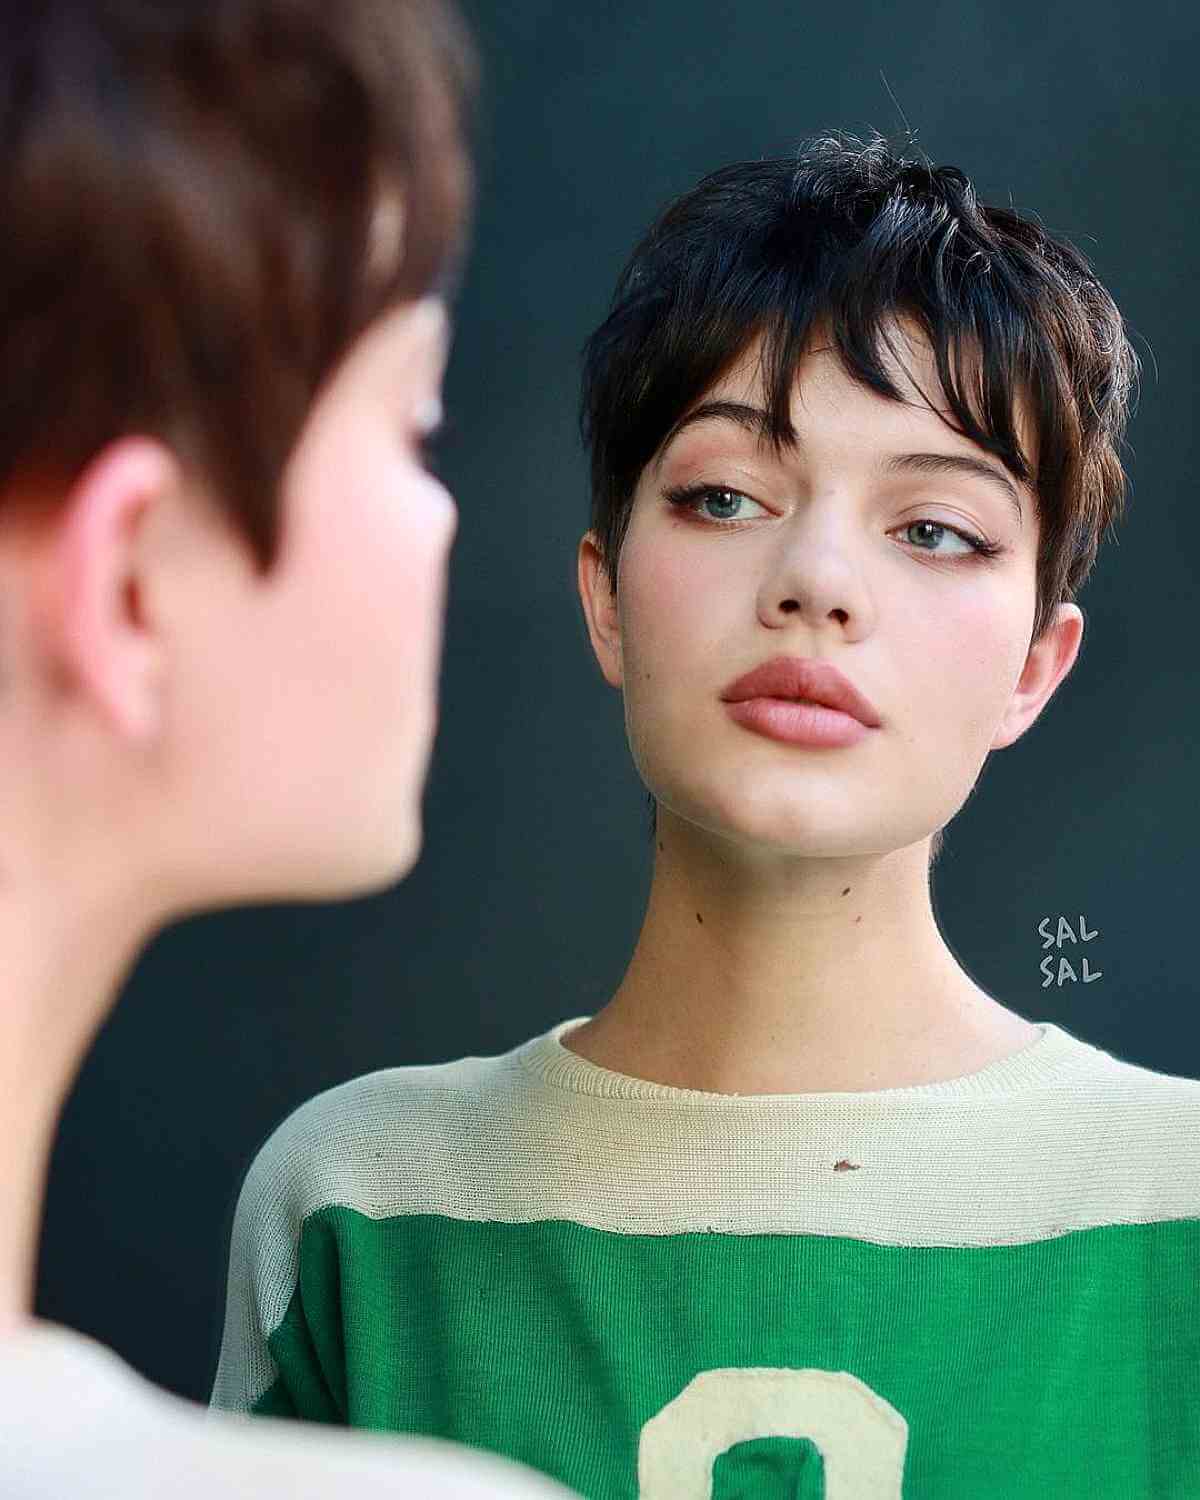 43 Types of Choppy Pixie Cuts Women Are Asking for This Year